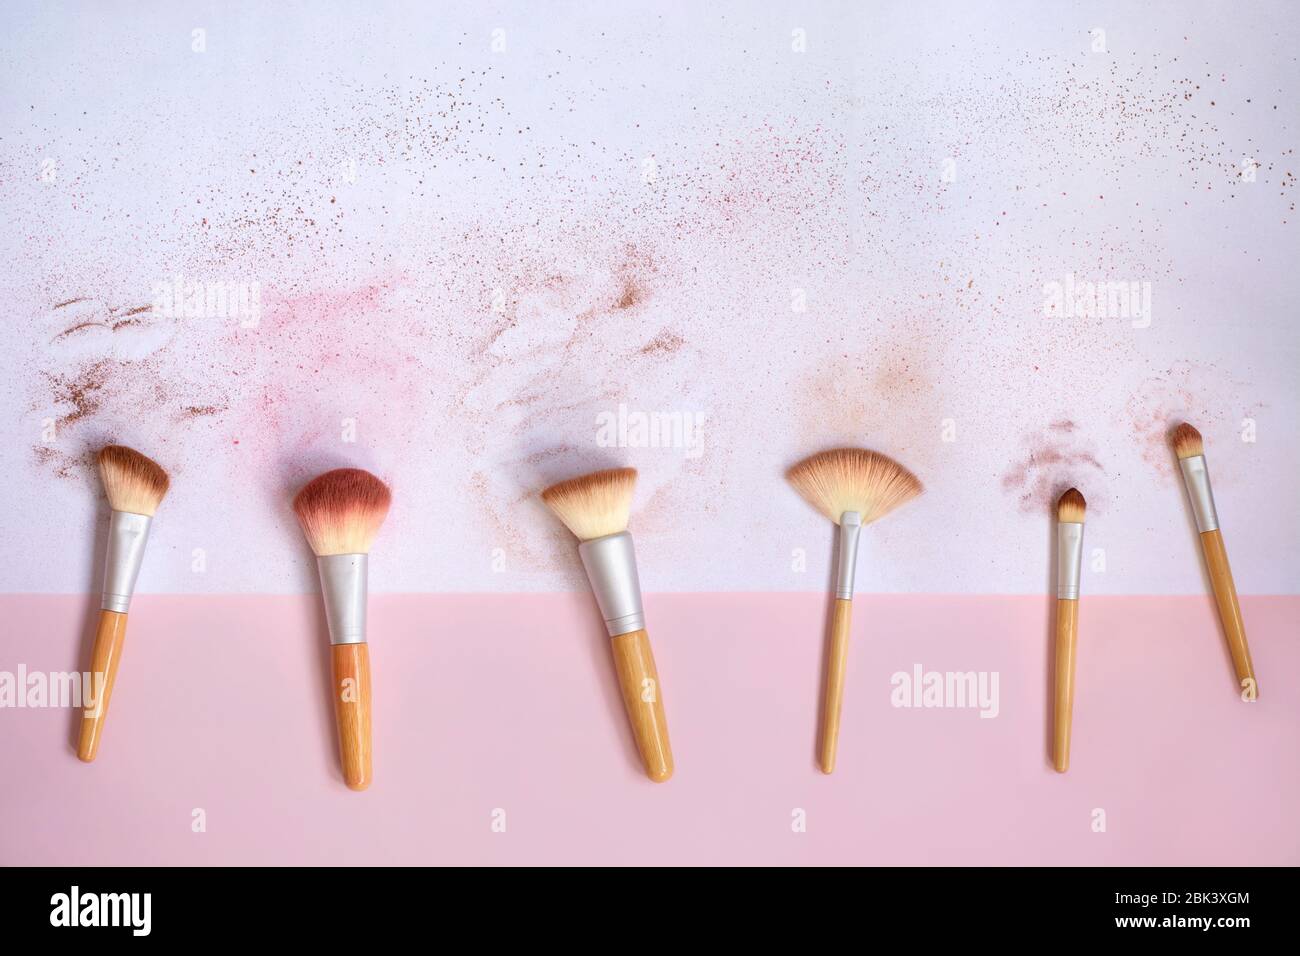 Top view of messy used eco-friendly makeup brushes with bamboo handles on white and pink background with traces of cosmetic makeup powder and blush. Stock Photo